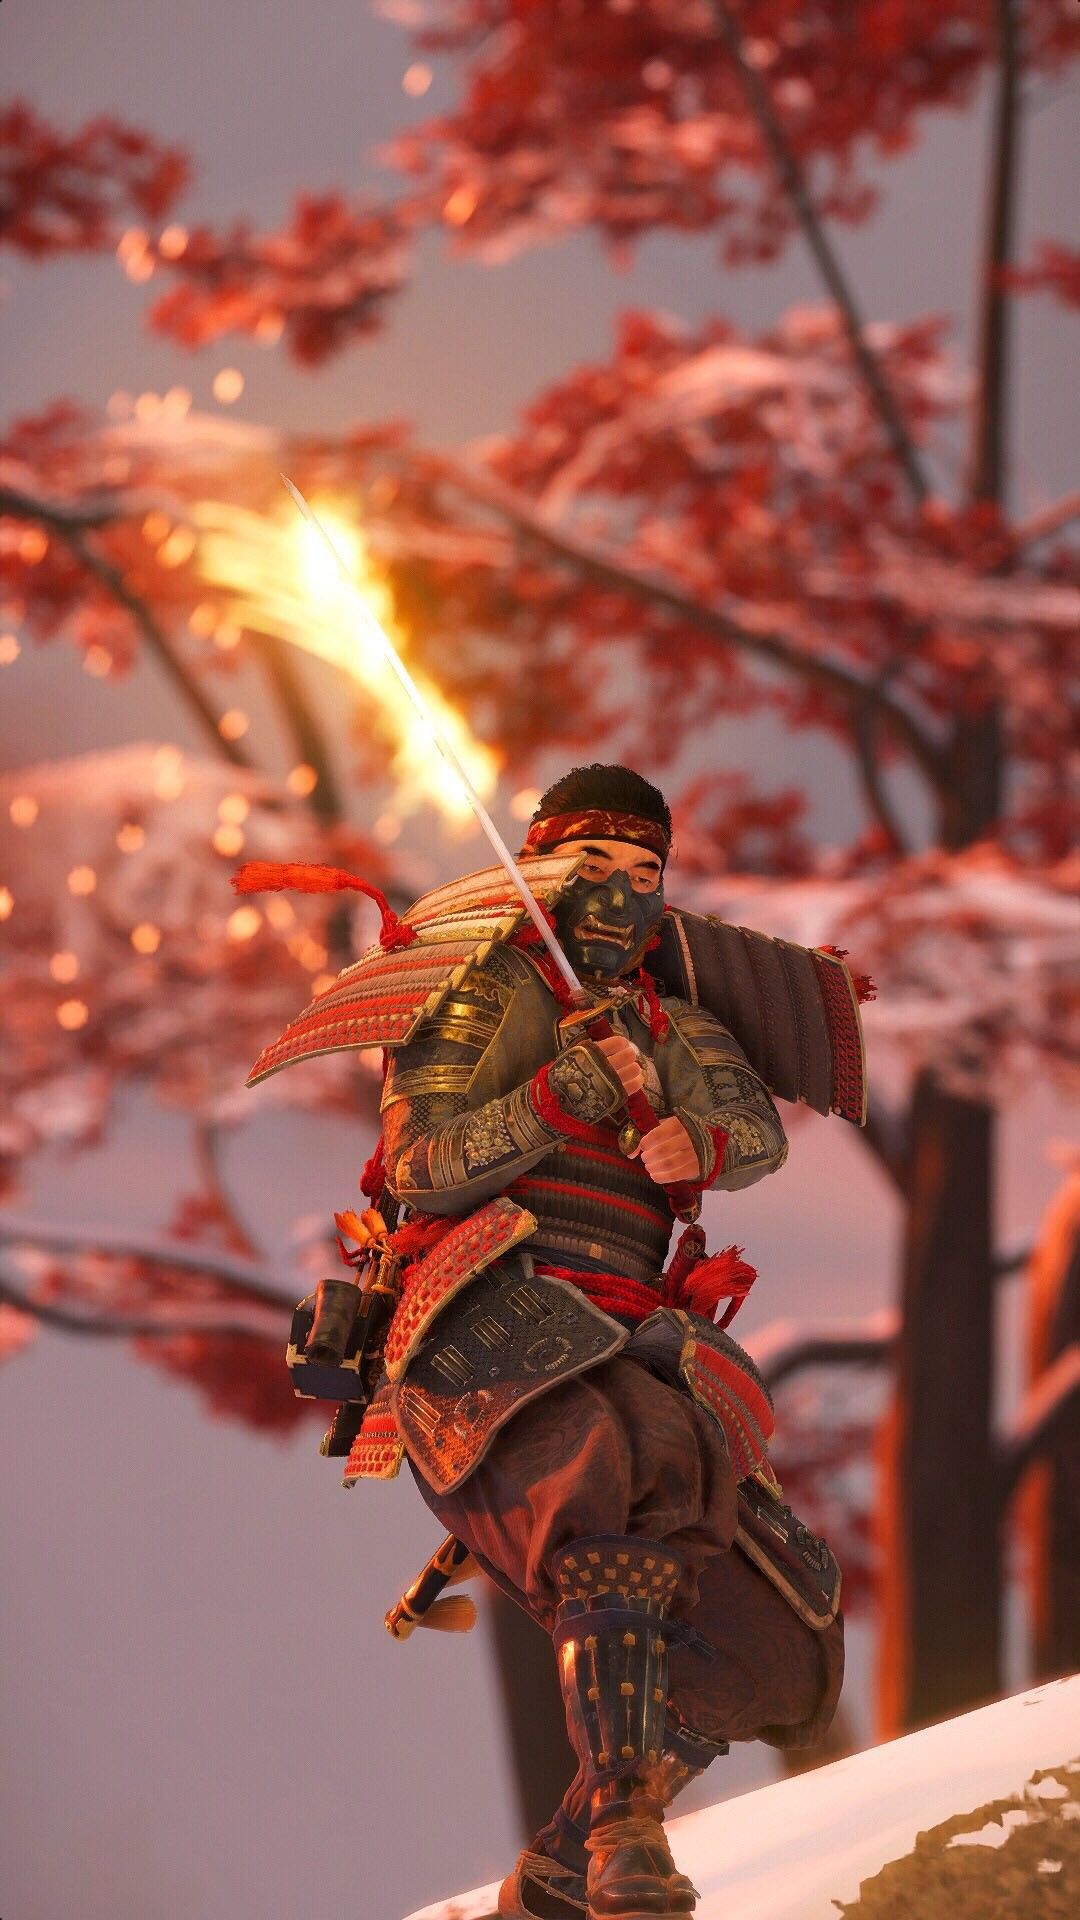 Ghost Of Tsushima Iphone Wallpapers